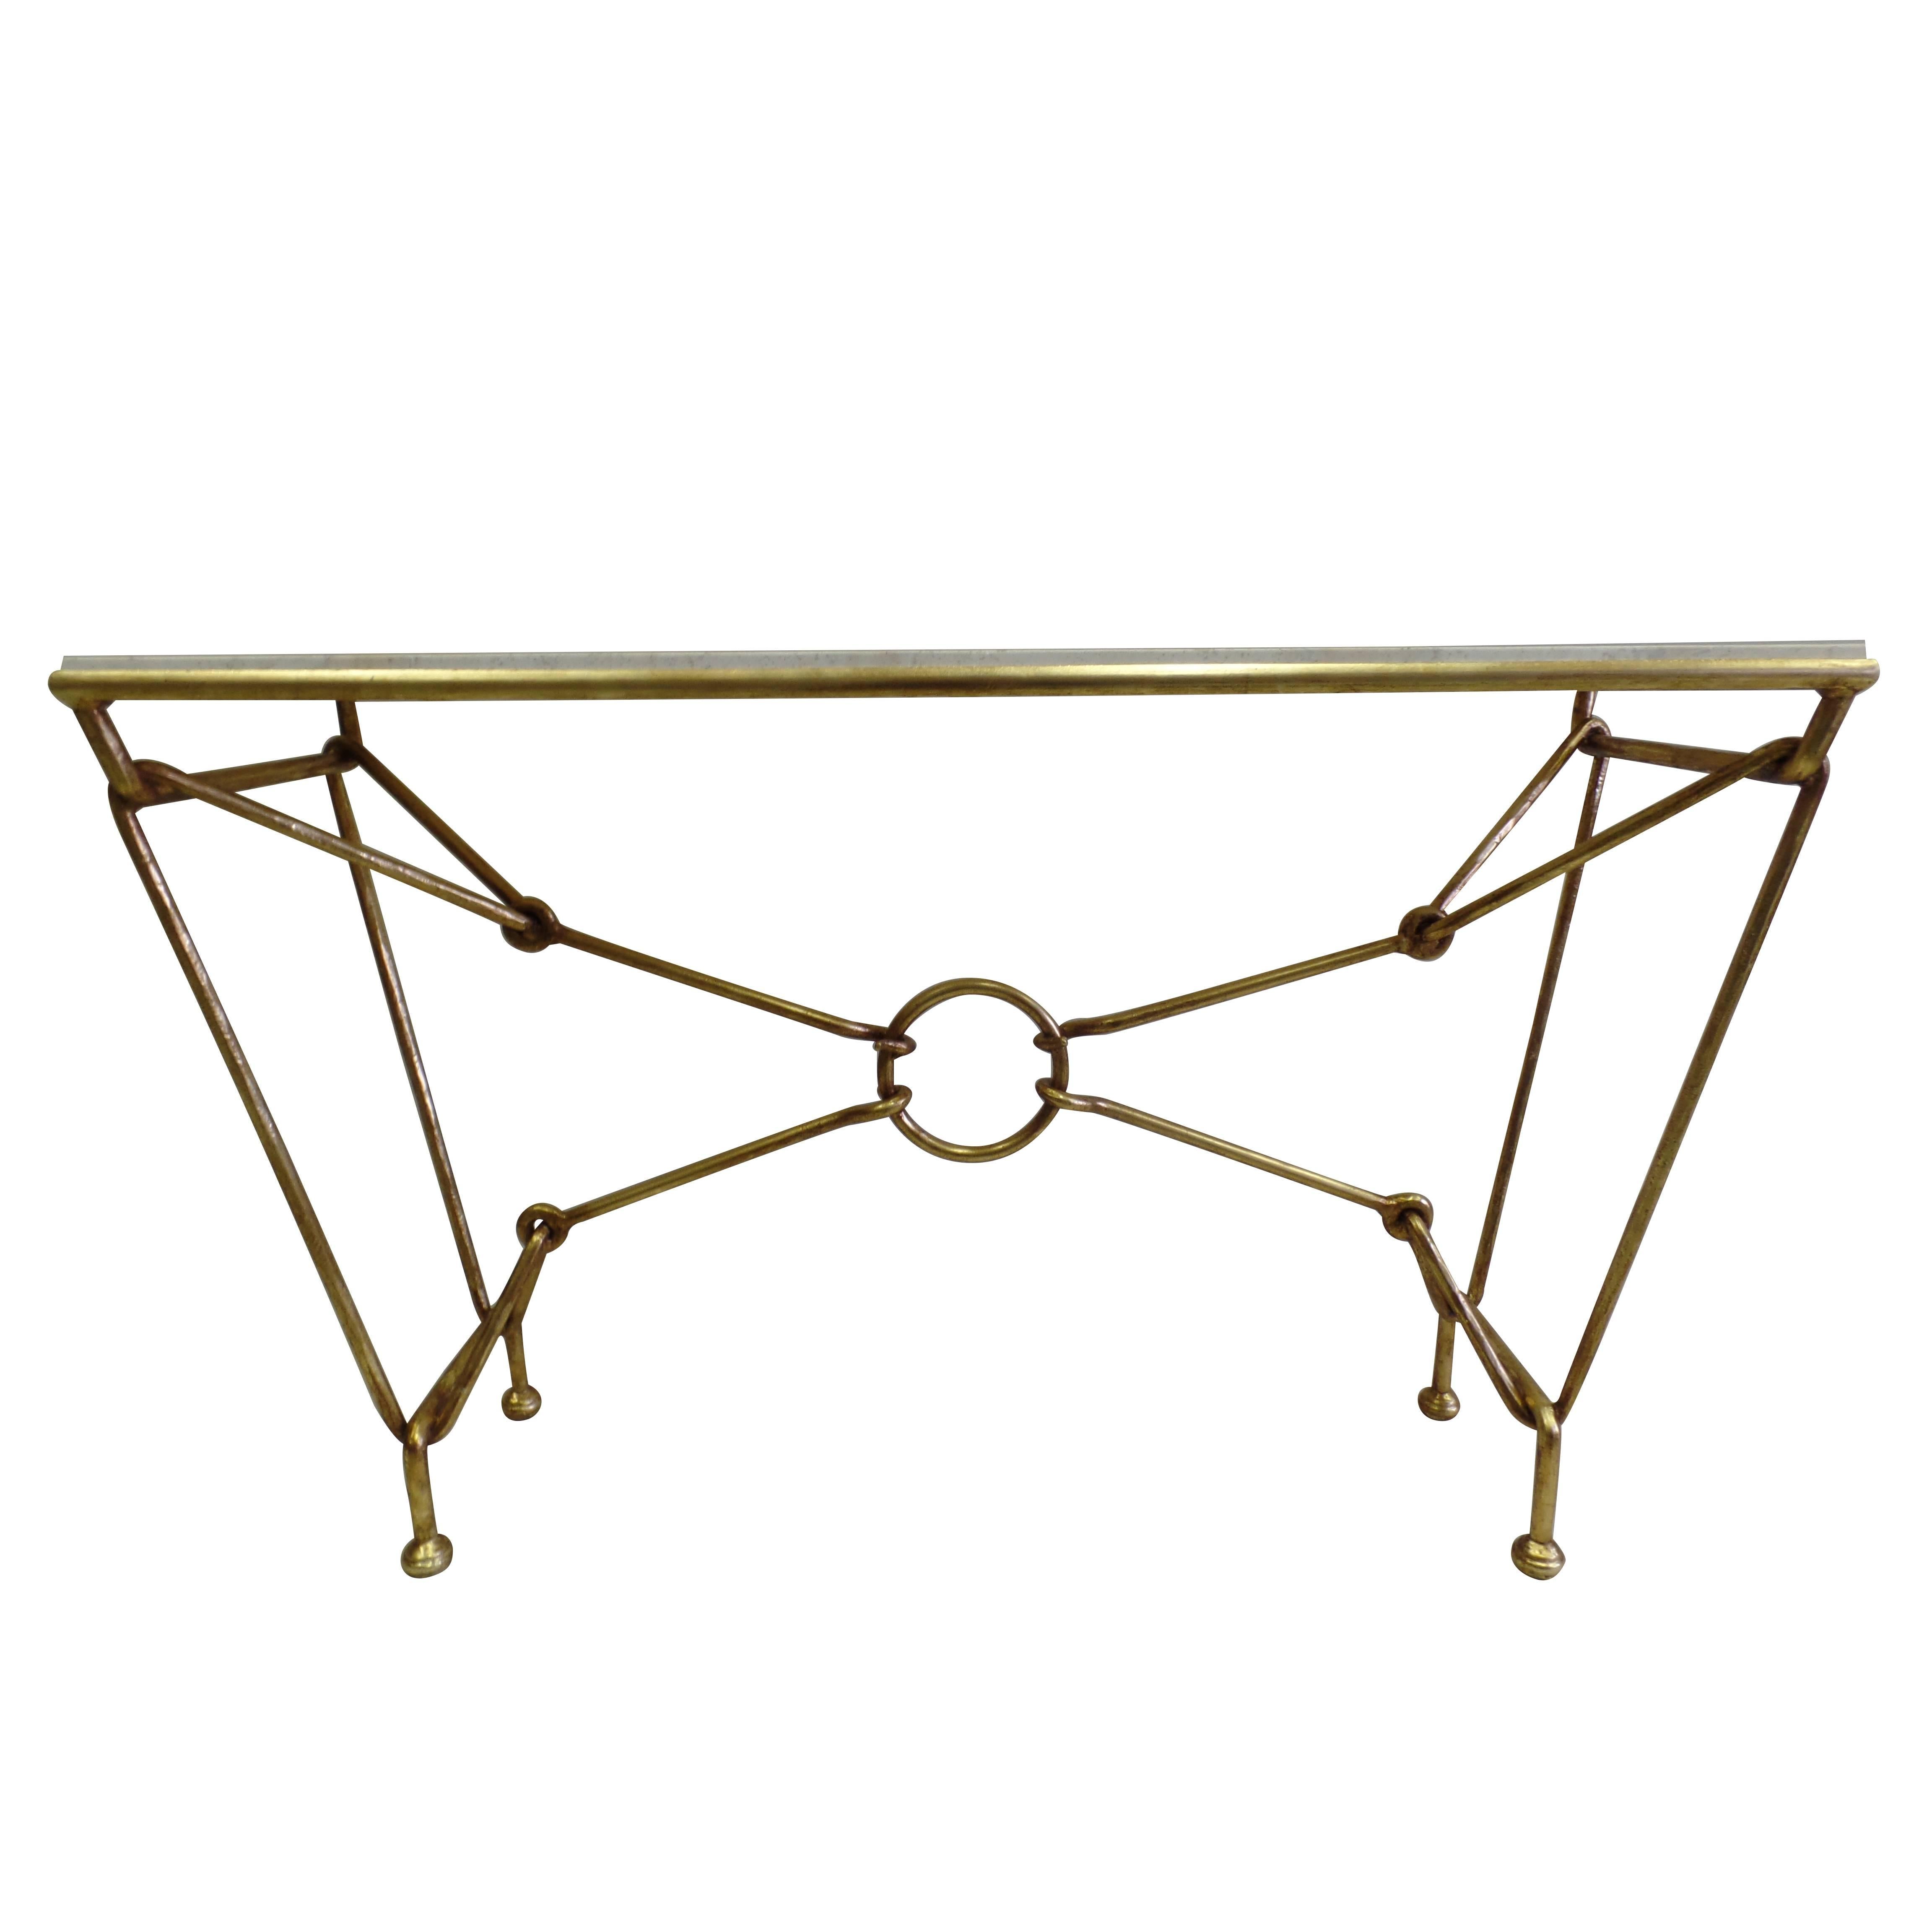 Italian Mid-Century, hand-wrought gilt iron console or sofa table by the Florentine sculptor / designer, Giovanni Banci in the modern neoclassical spirit. 

The table has bold lines with the gilt iron frame simulating a Classic Hermes pattern